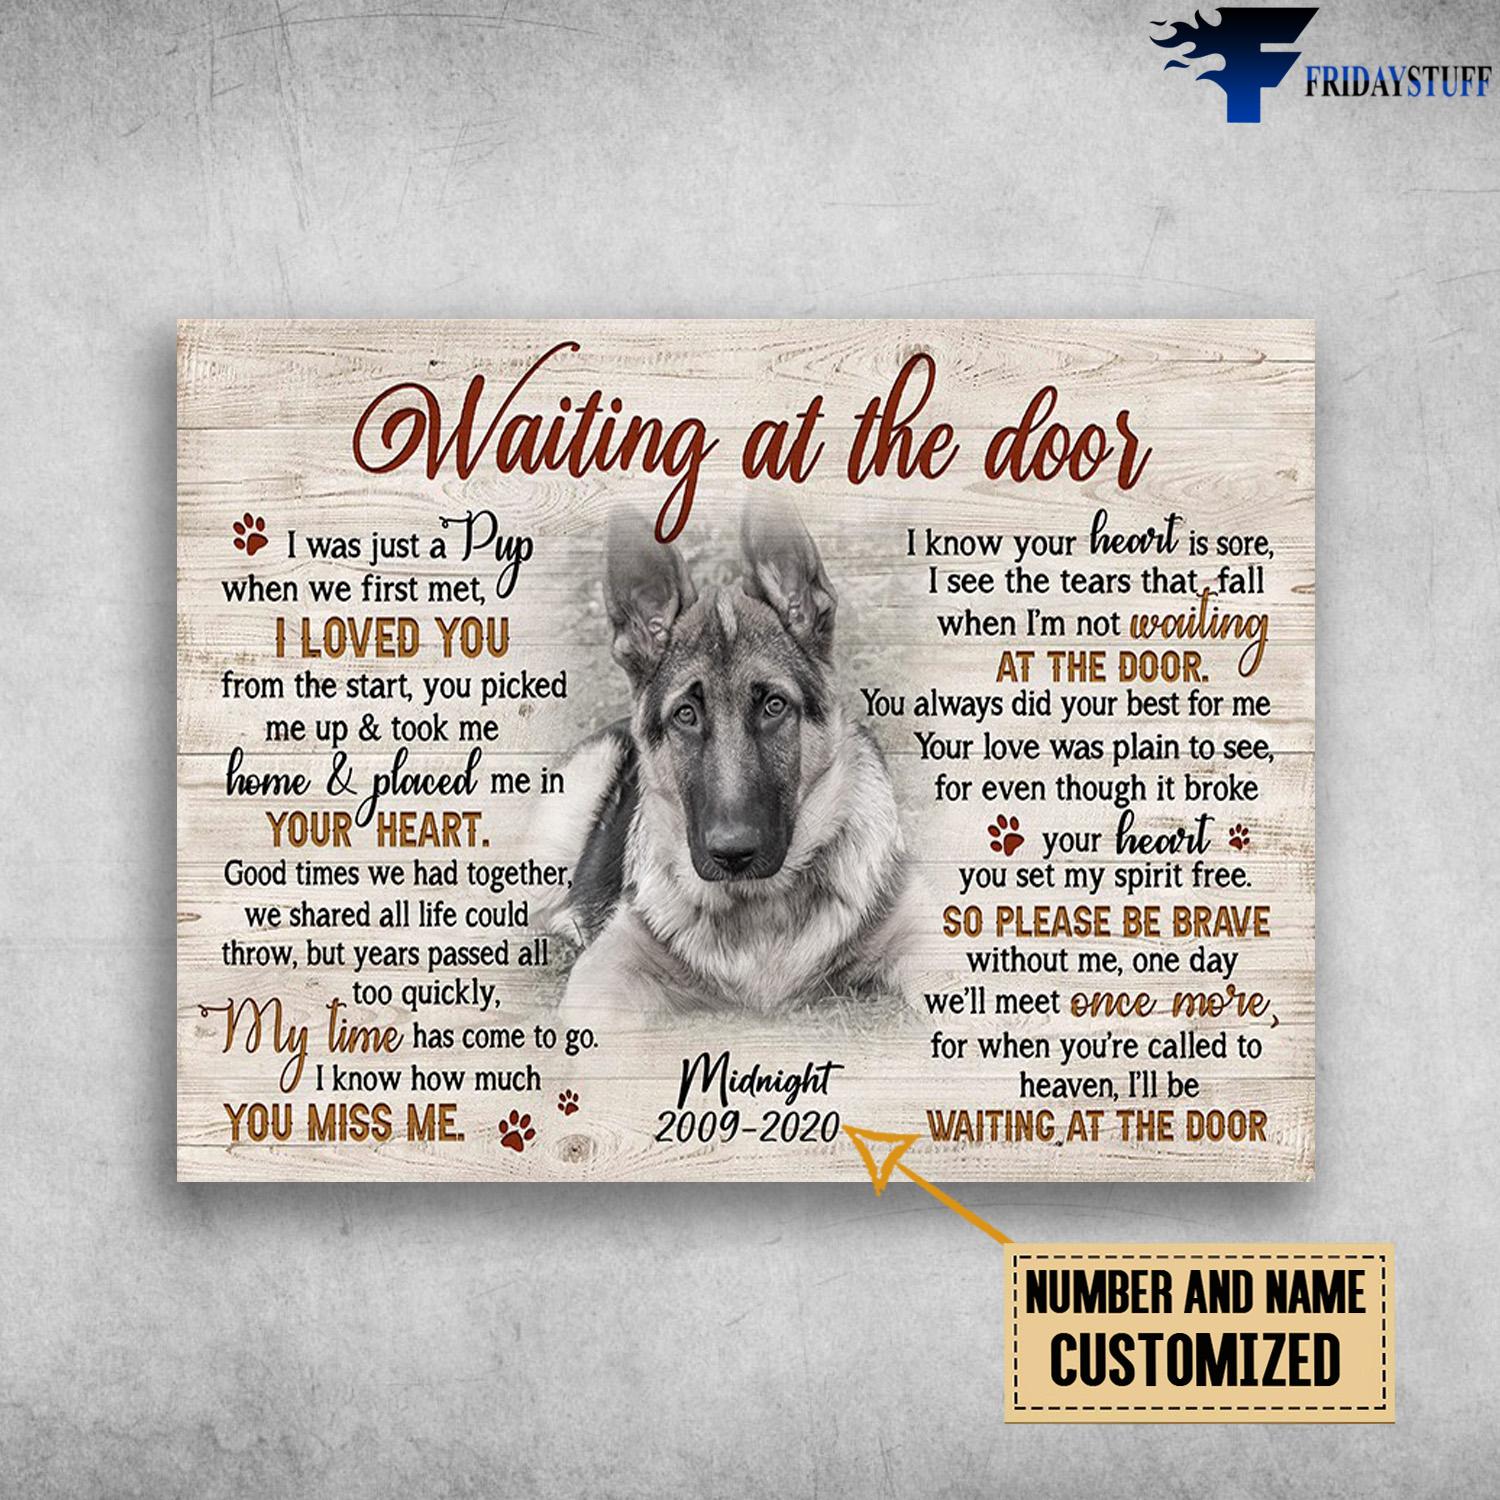 German Shepherd Dog, Dog Lover, Waiting At The Door, I Was Just A Dog, When We First Met, I Loved You, From The Start, You Picked Me Up And Took Me Home, And Placed Me Is Your Heart, Goof Times We Had Together